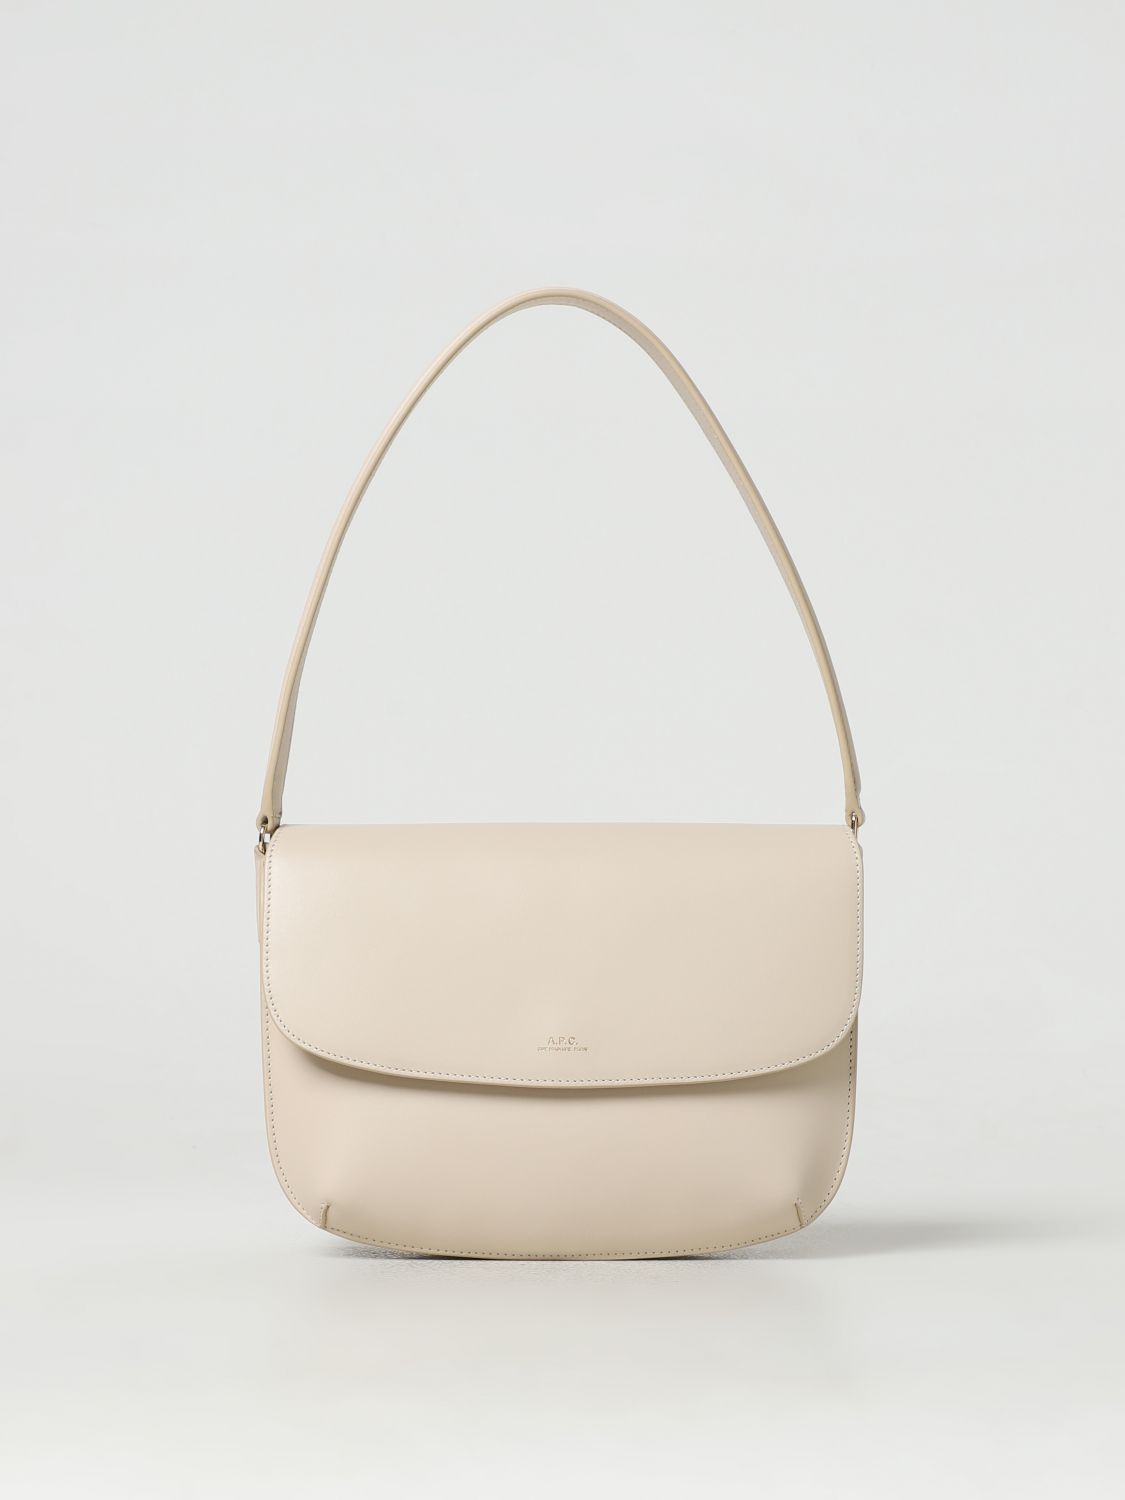 A.P.C. Sarah A. P.C. bag in leather with logo